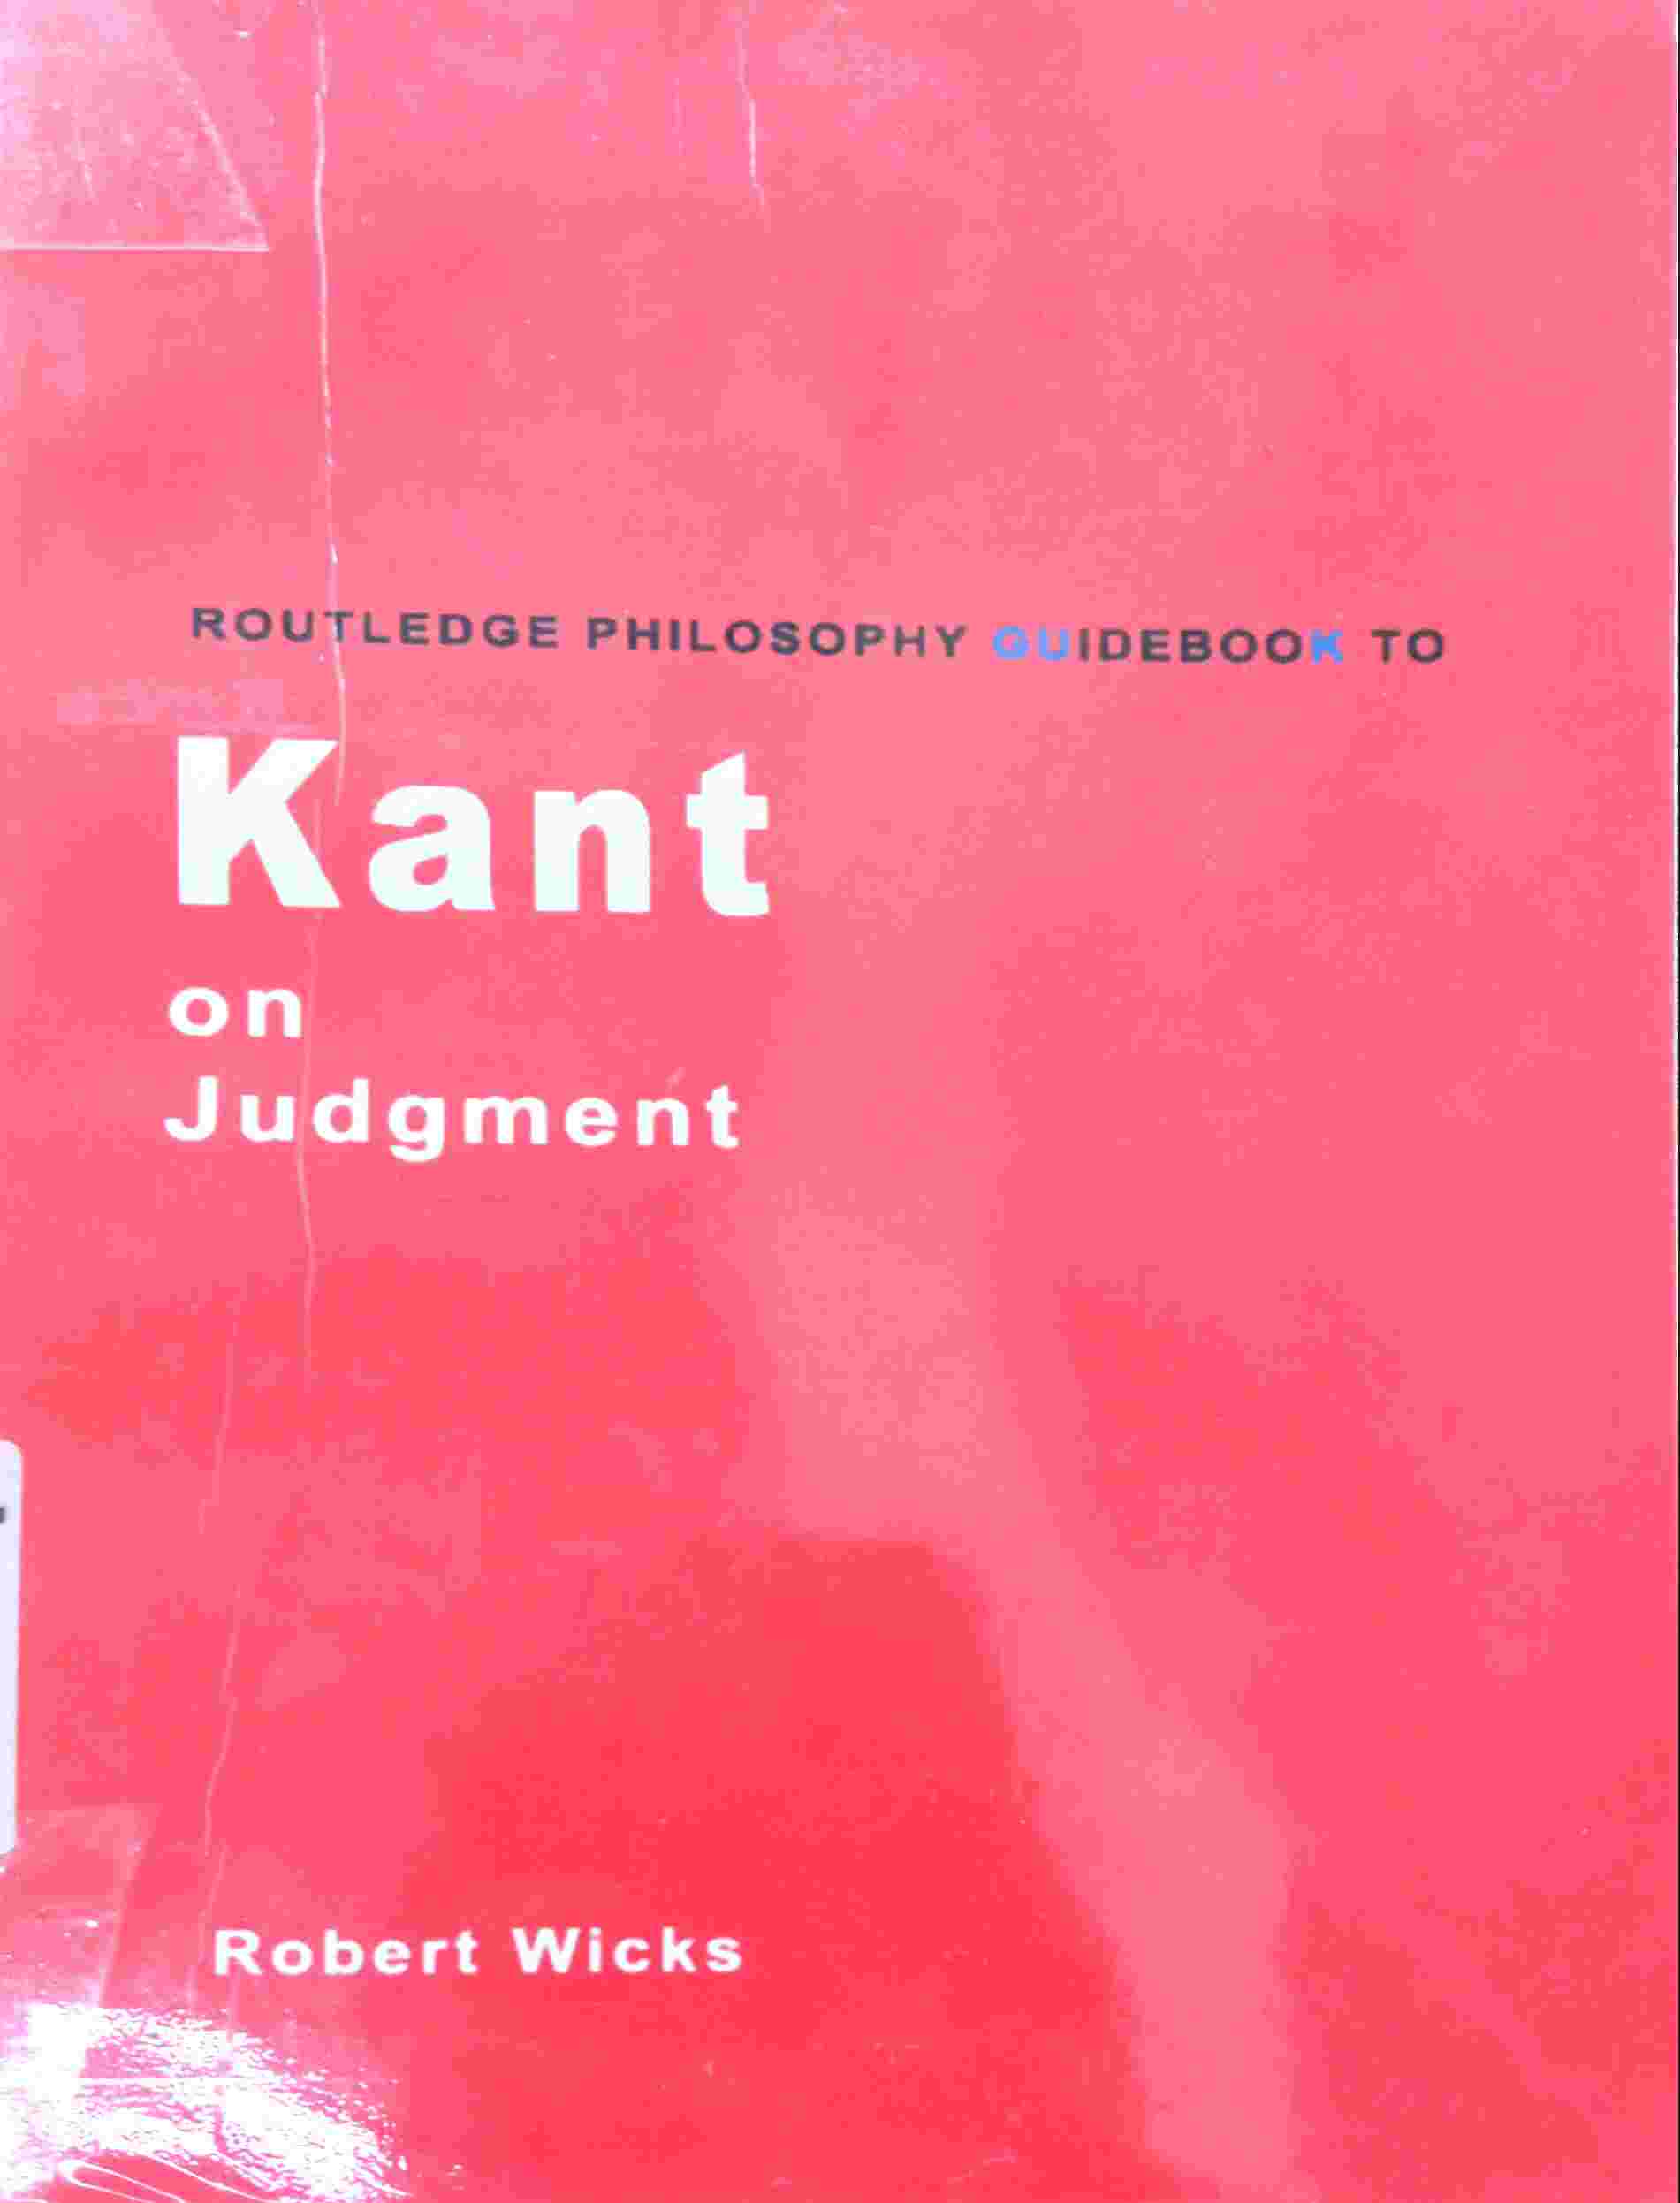 ROUTLEDGE PHILOSOPHY GUIDEBOOK TO KANT ON JUDGEMENT